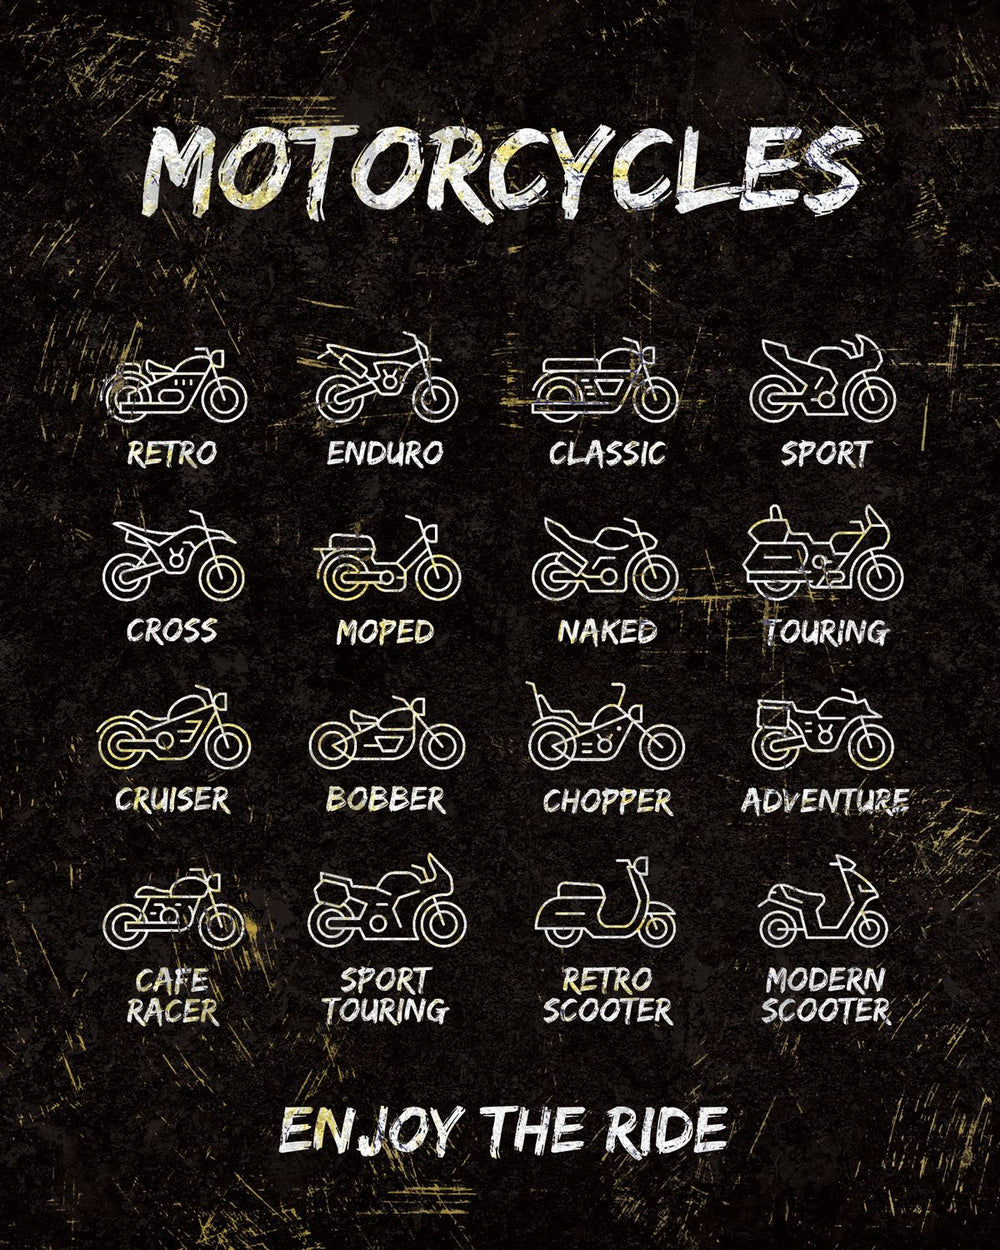 Motorcycles Chart